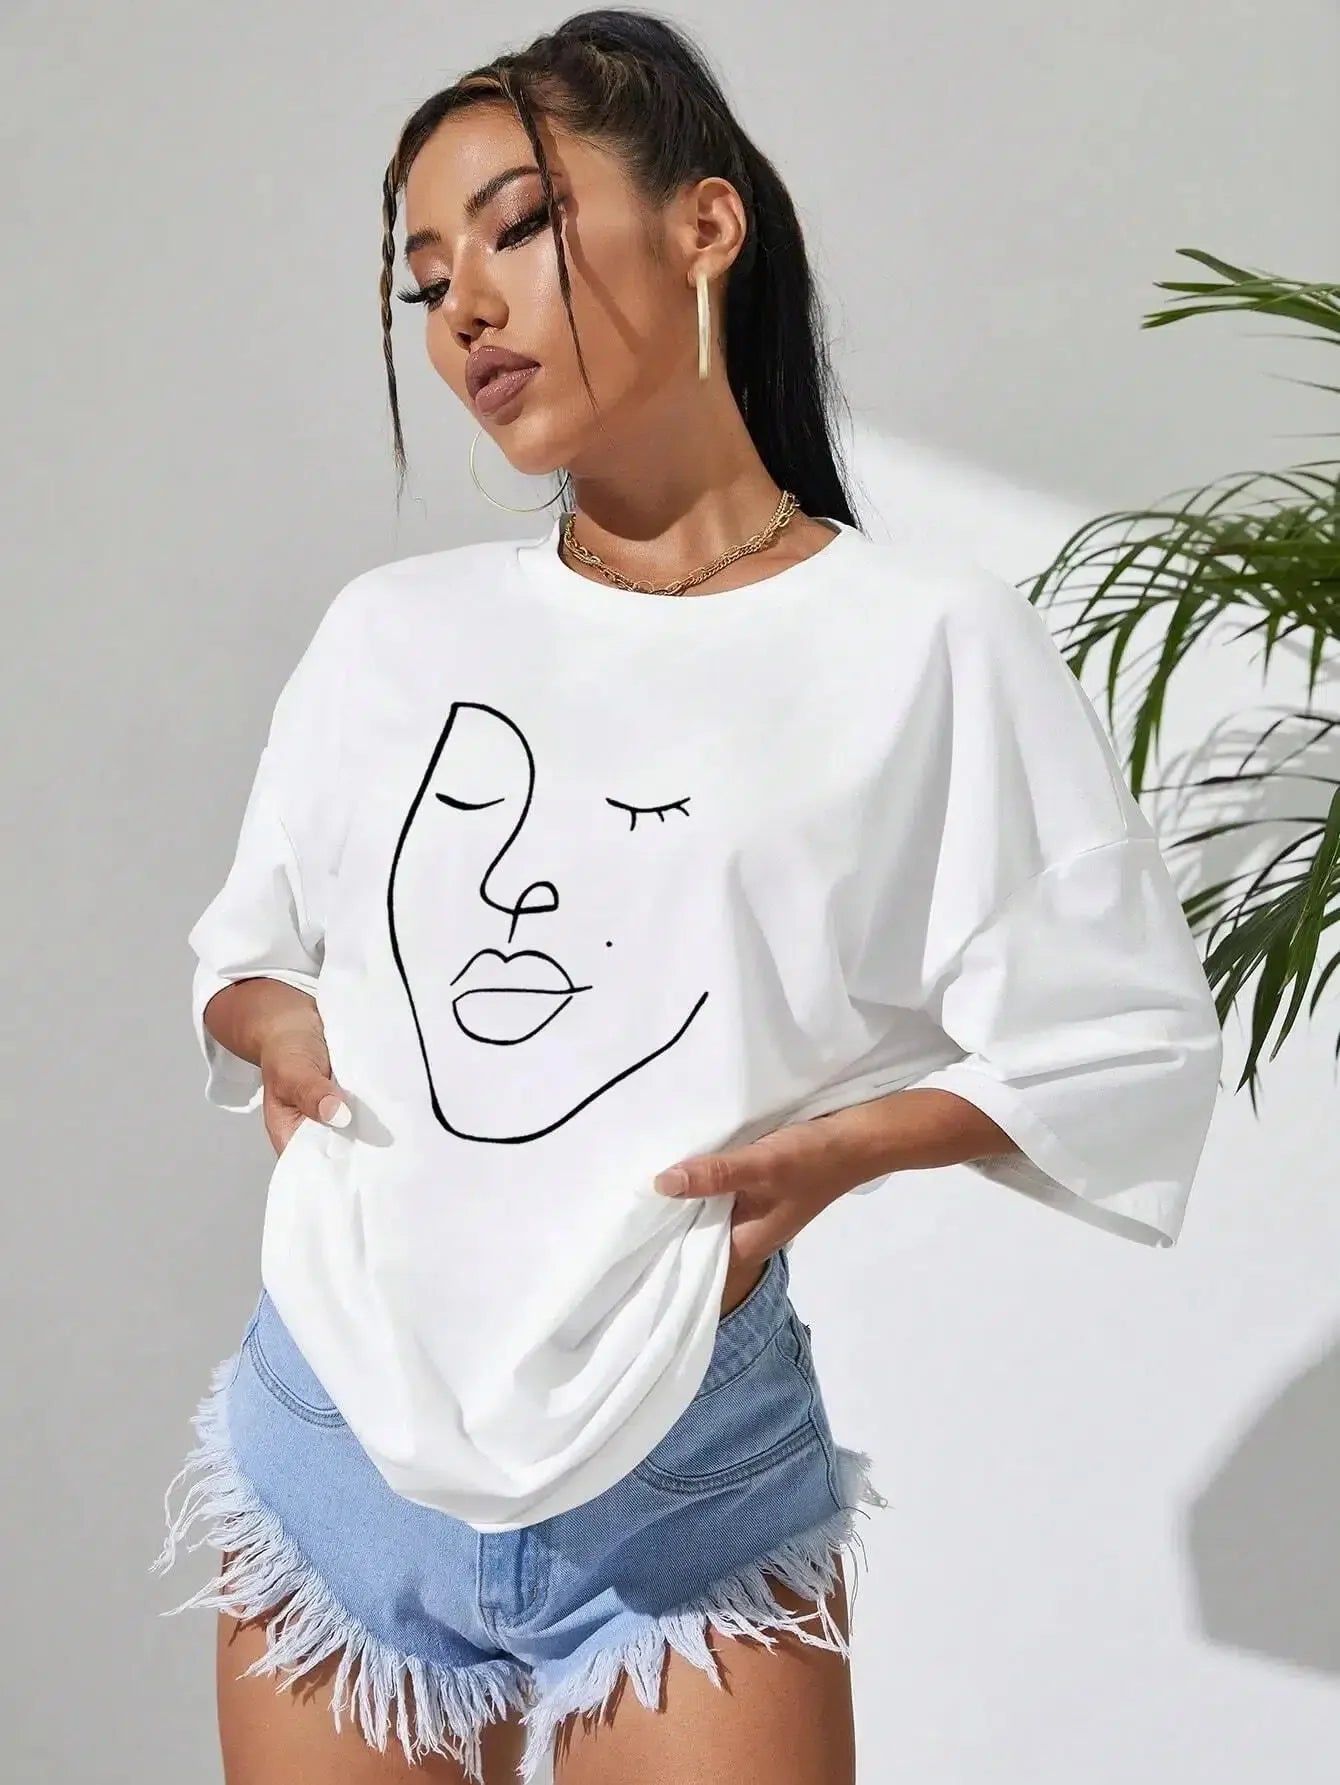 Abstract Woman Face Tee-White-S-Mauv Studio